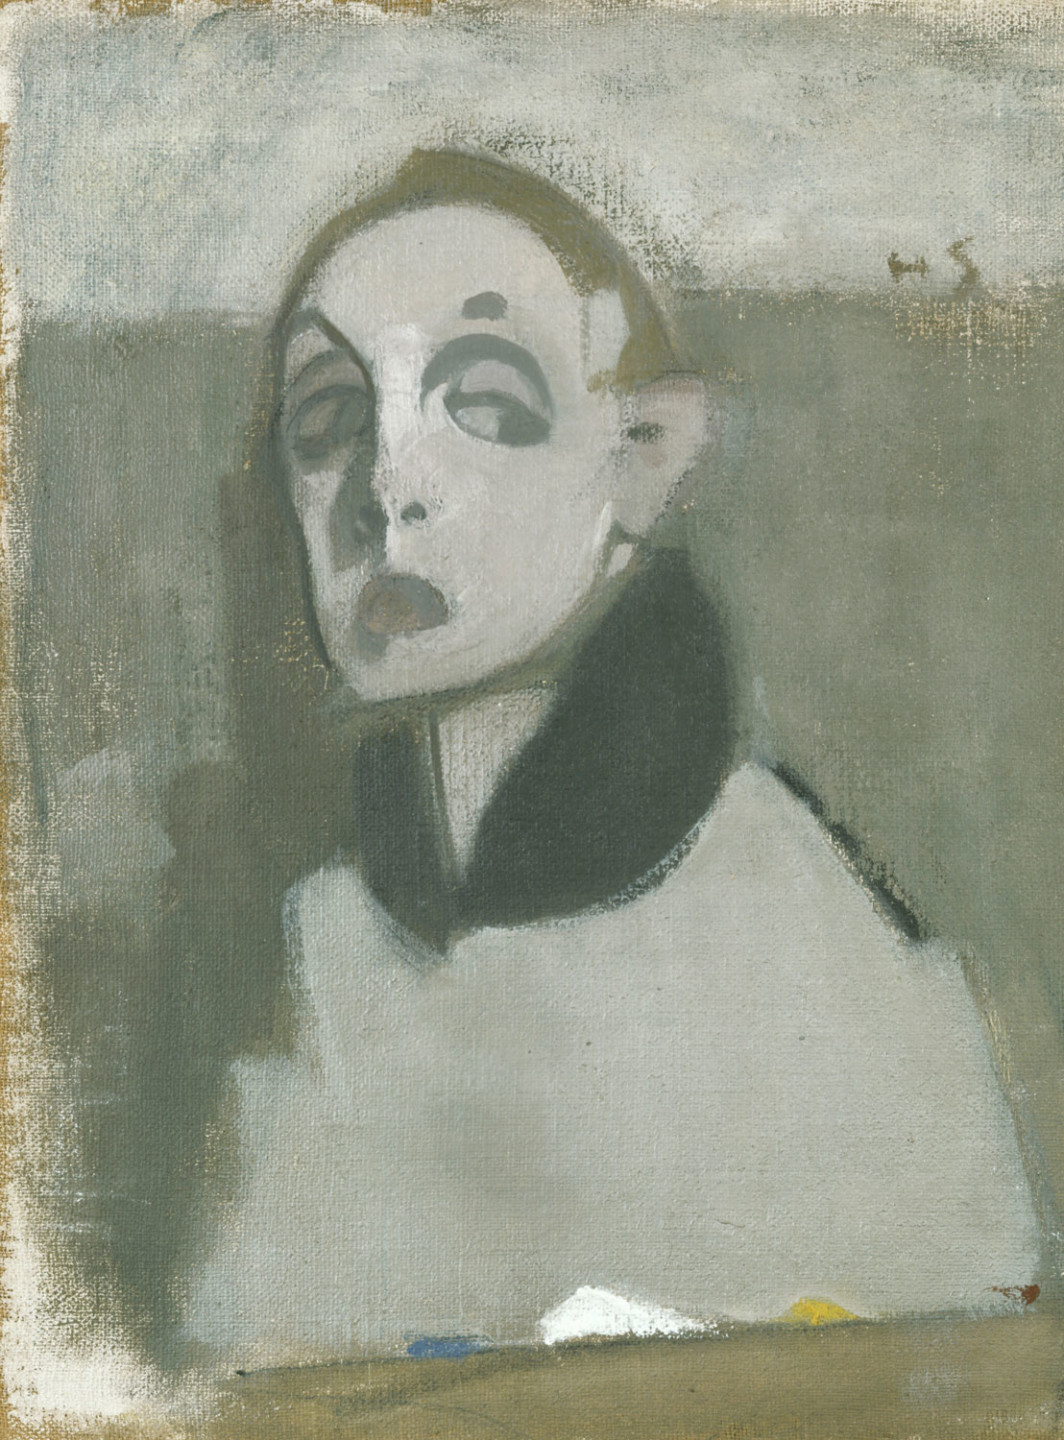 Painting by Helene Schjerfbeck.